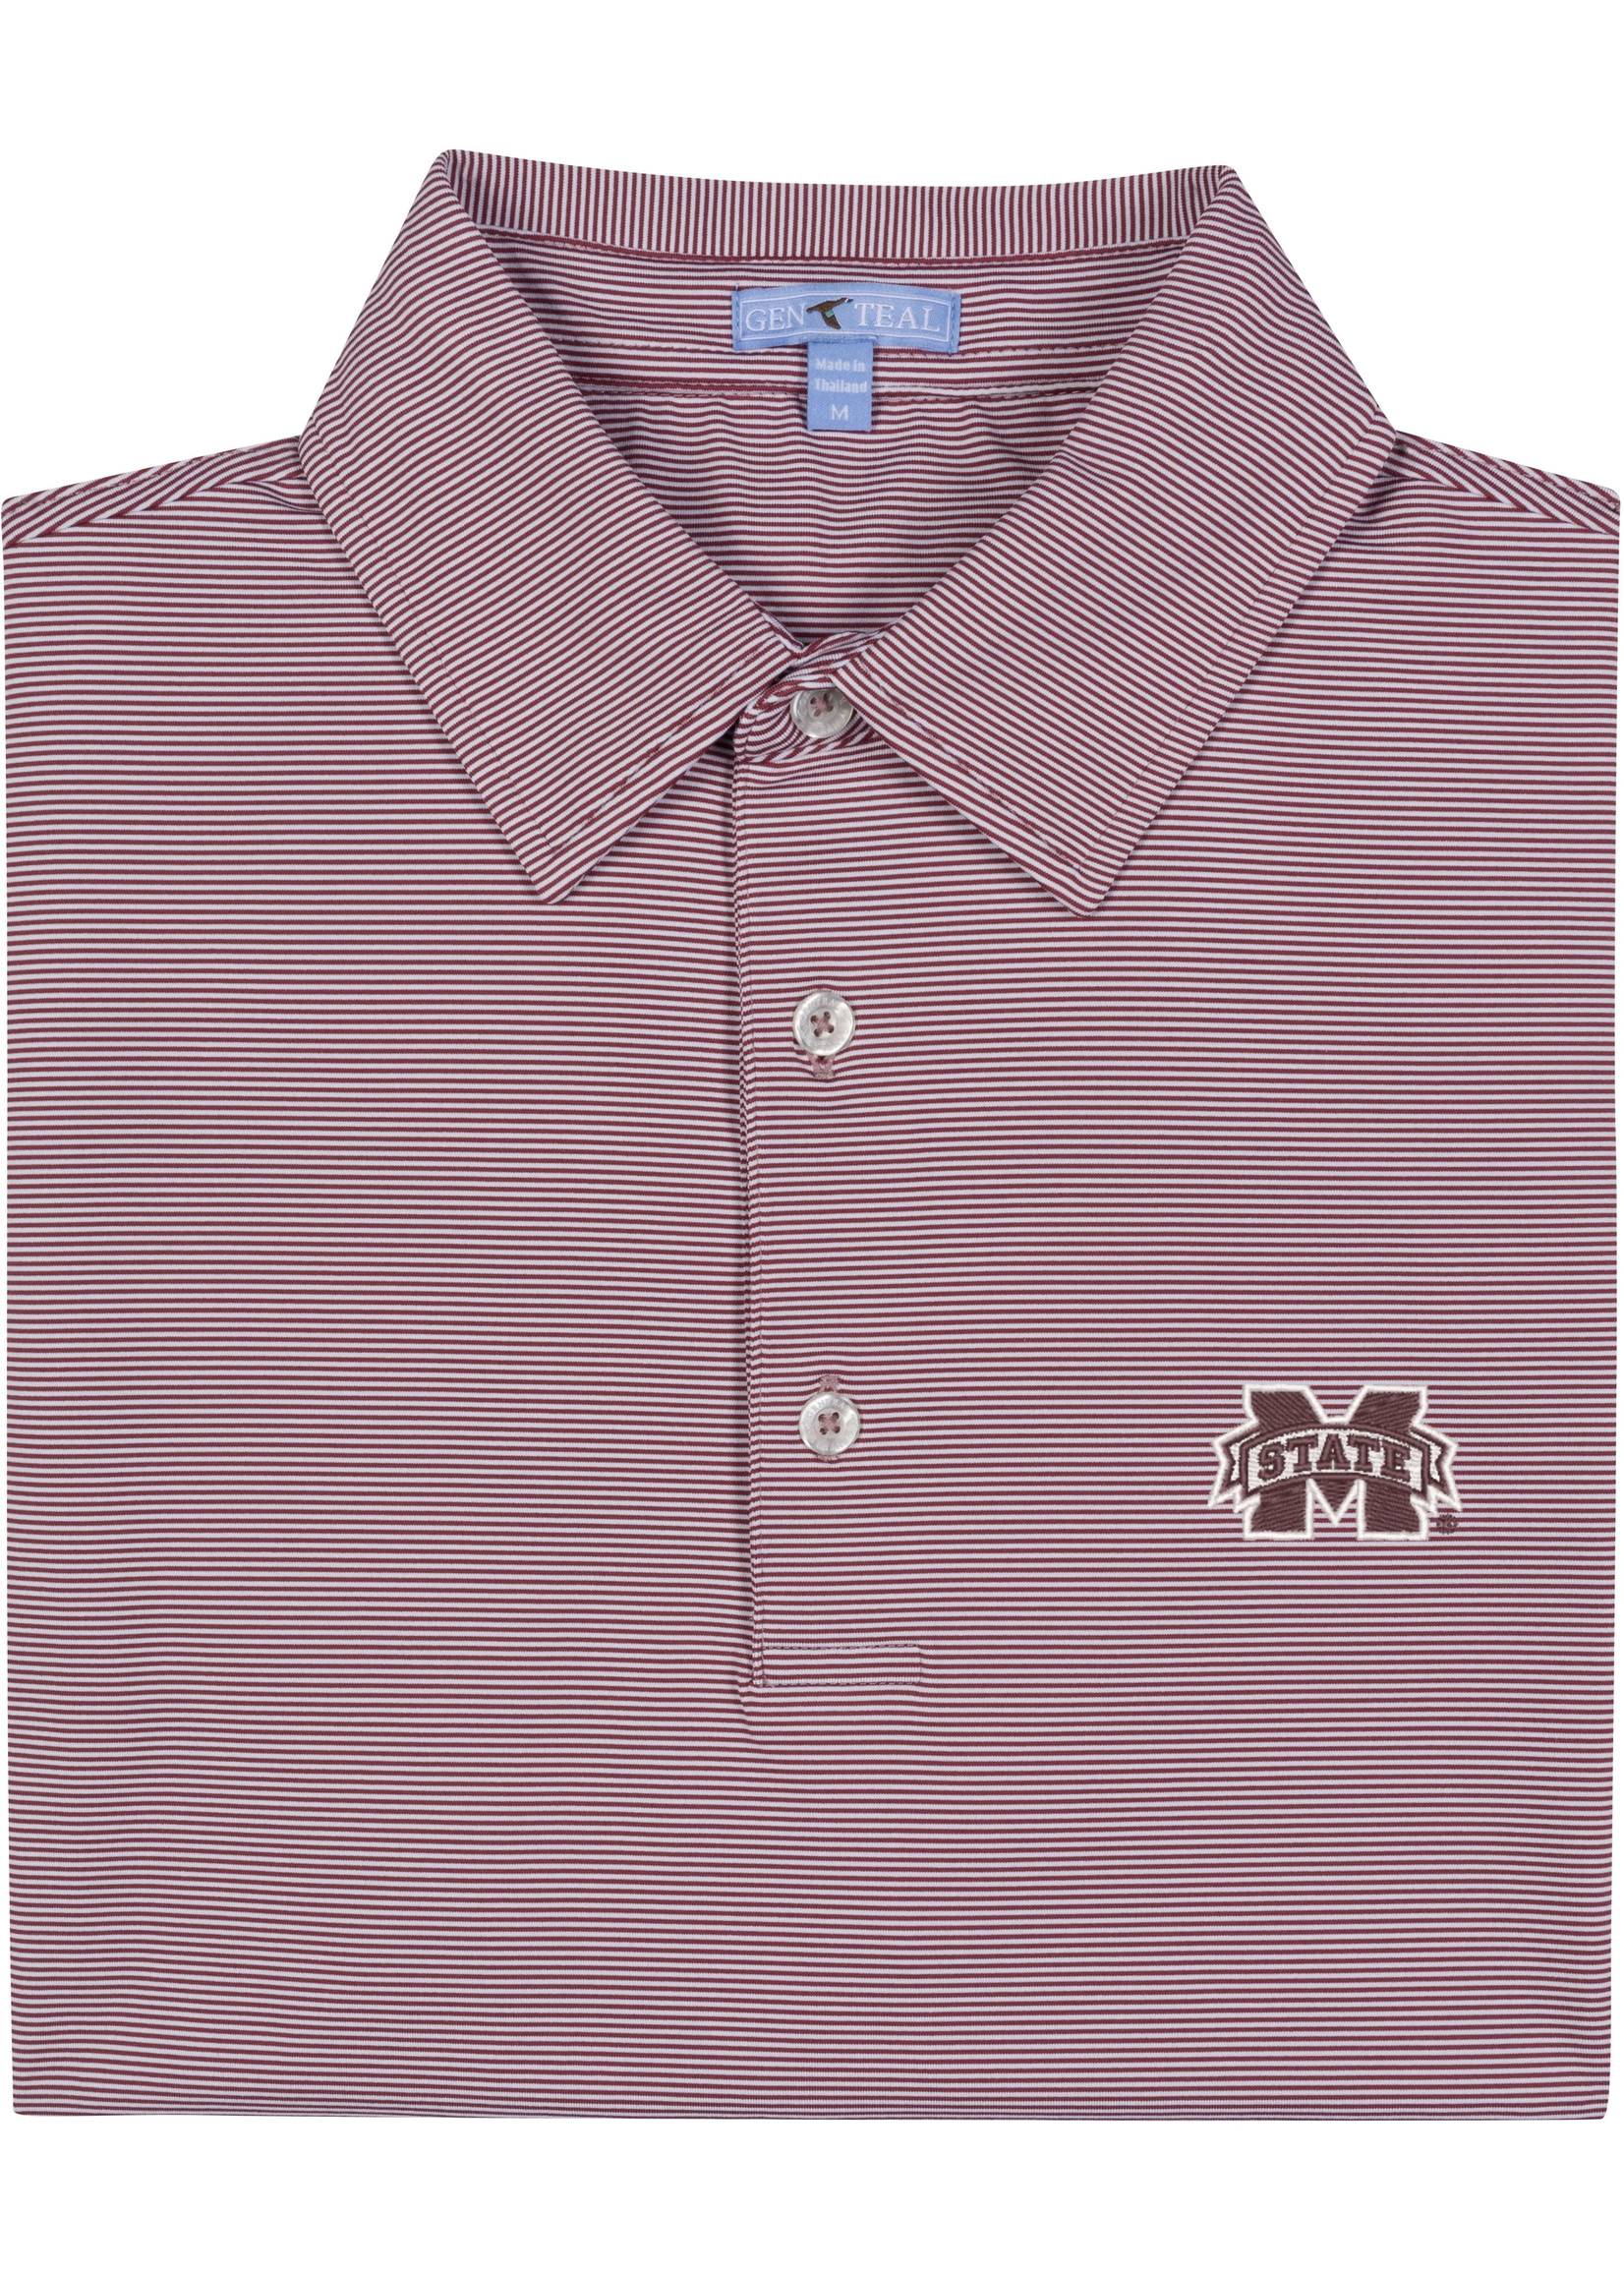 GenTeal Apparel Mississippi State Maroon Pinstripe Polo